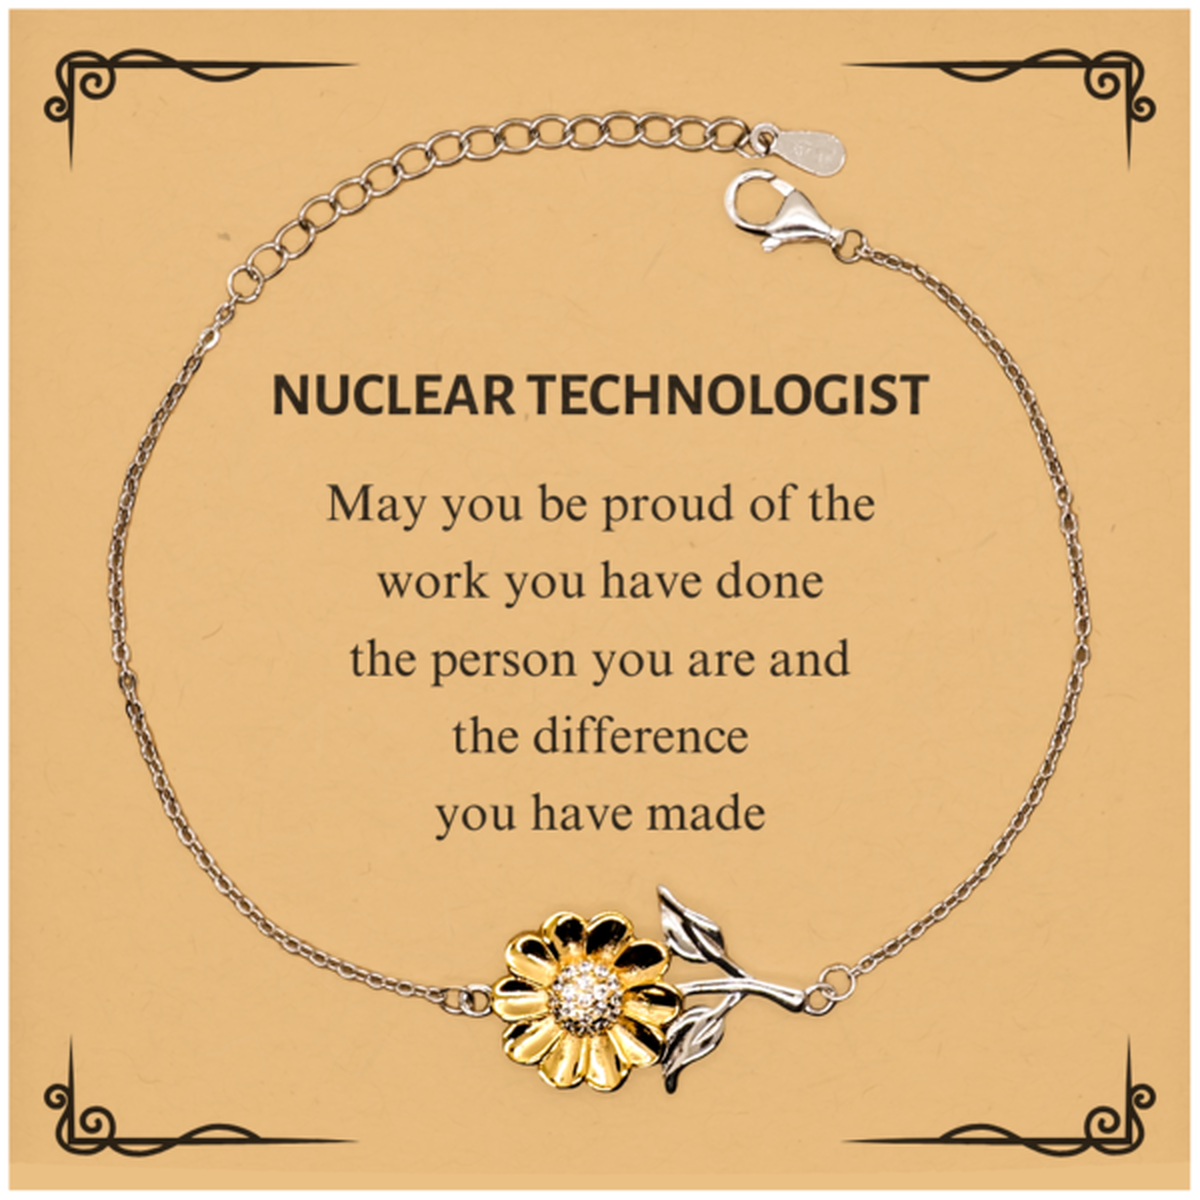 Nuclear Technologist May you be proud of the work you have done, Retirement Nuclear Technologist Sunflower Bracelet for Colleague Appreciation Gifts Amazing for Nuclear Technologist